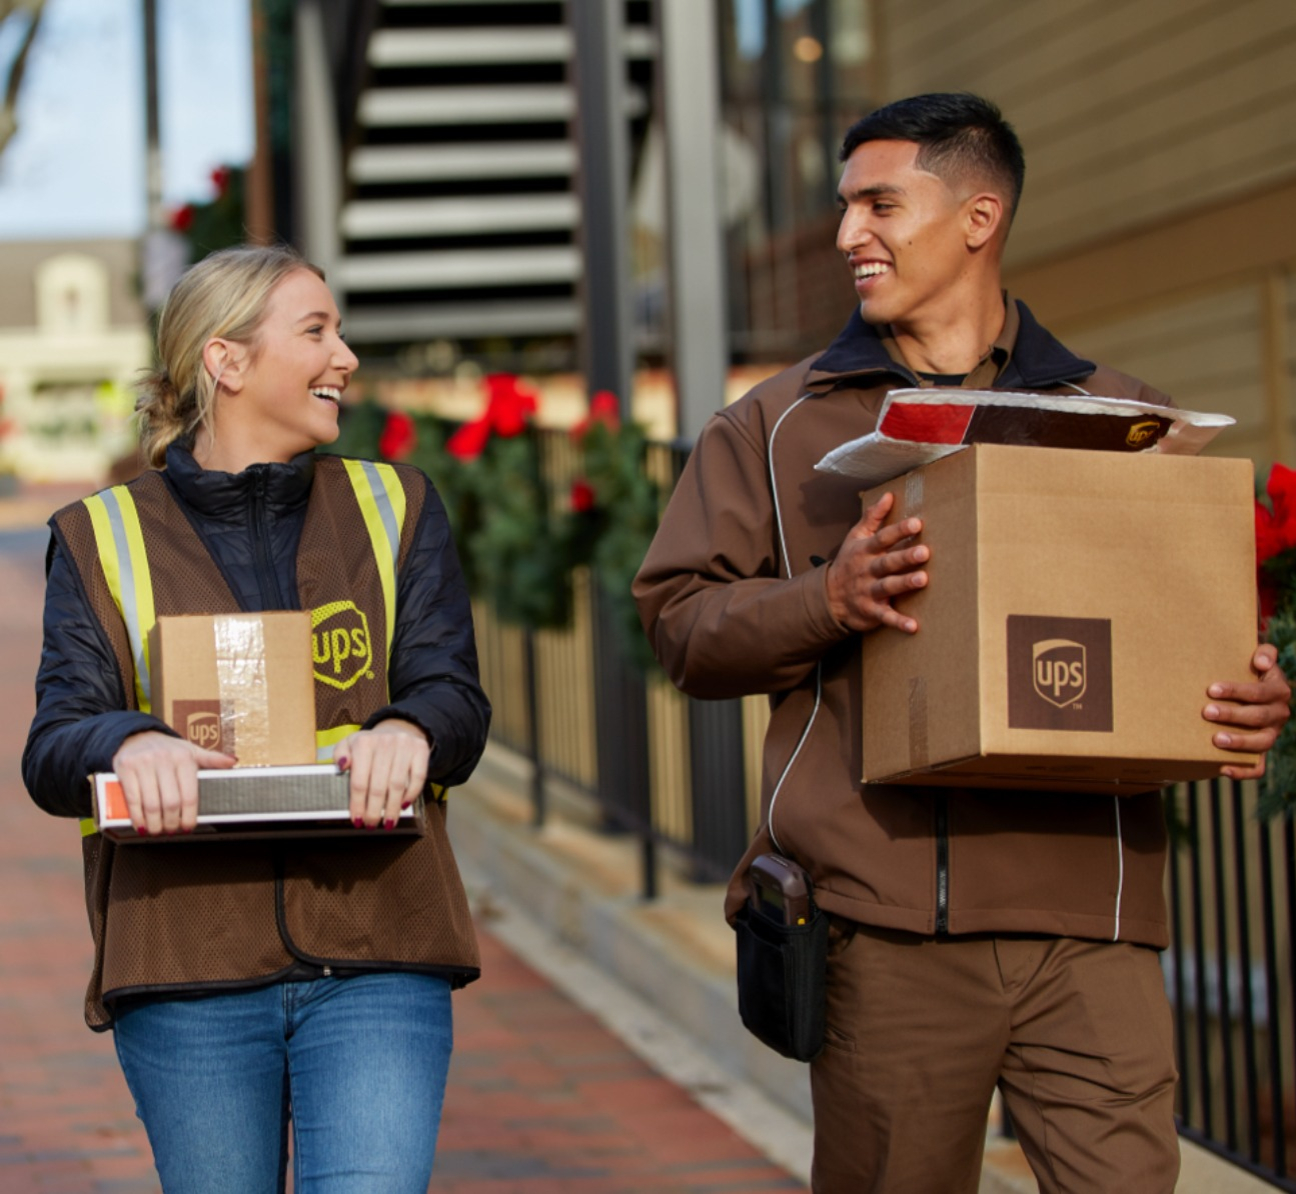 UPSers holding boxes